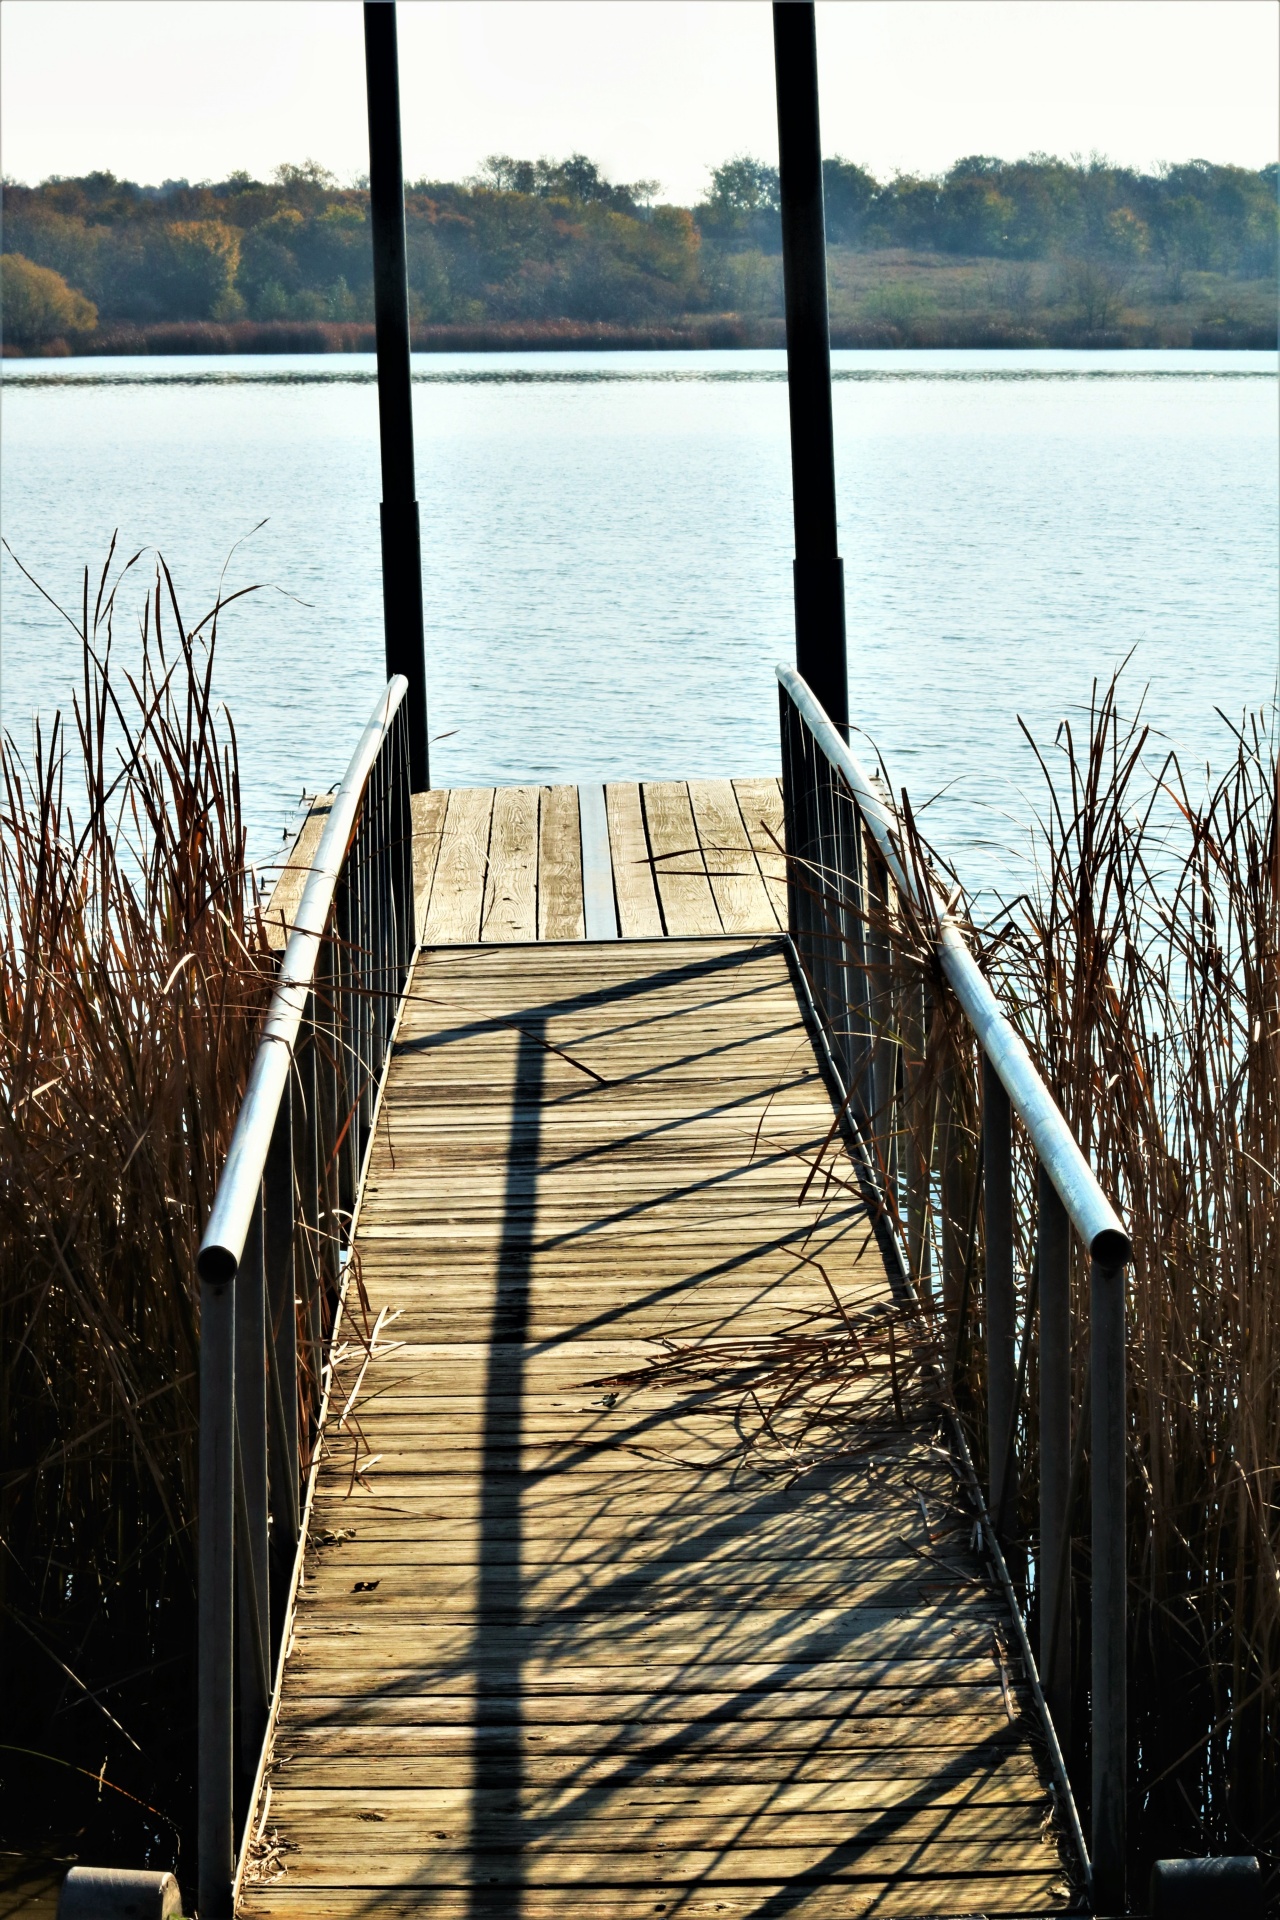 A small pier, lined with cattails, leading into a blue lake with autumn trees and blue sky in the background.